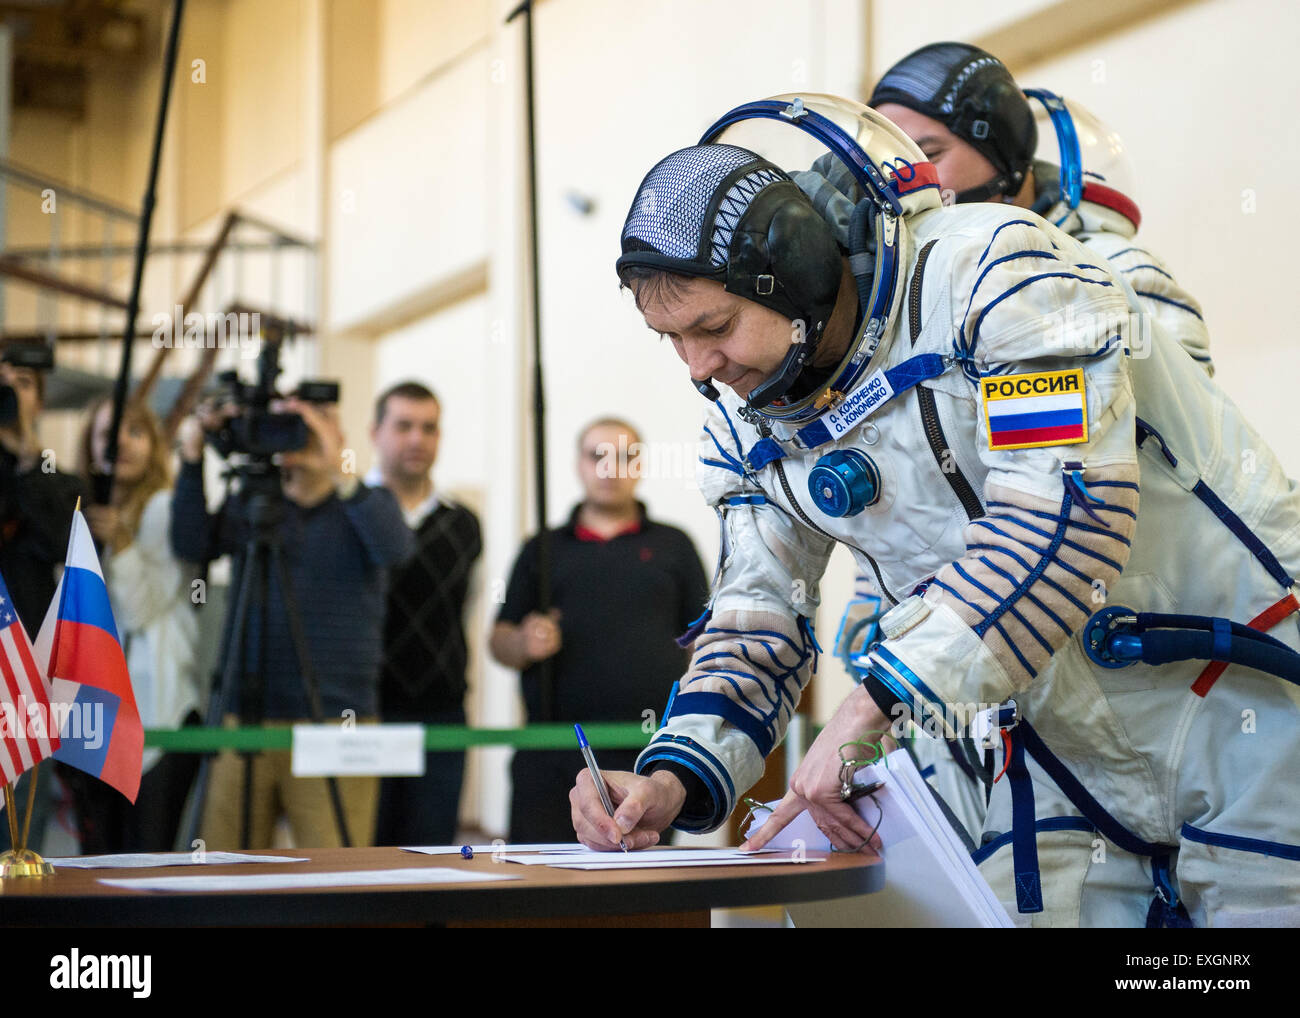 Russian cosmonaut Oleg Kononenko signs documents during the second day of qualification exams with NASA astronaut Kjell Lindgren and Japan Aerospace Exploration Agency (JAXA) astronaut Kimya Yui, Thursday, May 7, 2015 at the Gagarin Cosmonaut Training Center (GCTC) in Star City, Russia. The Expedition 44/45 trio is preparing for launch to the International Space Station in their Soyuz TMA-17M spacecraft from the Baikonur Cosmodrome in Kazakhstan. Stock Photo